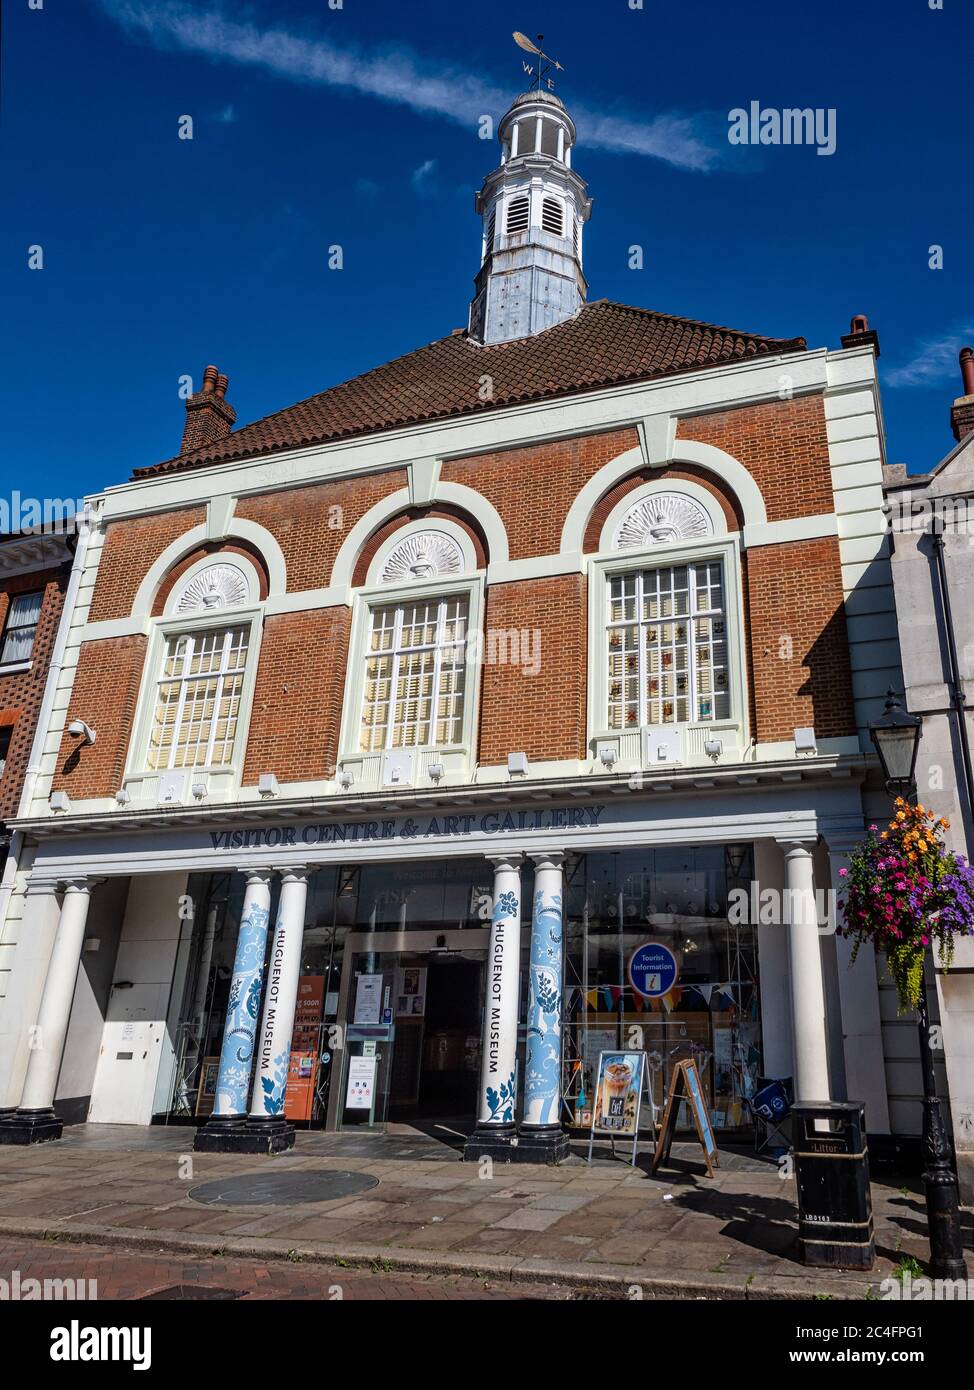 ROCHESTER, KENT, UK - SEPTEMBER 13, 2019:  Exterior view of the Huguenot Museum in the High Street Stock Photo